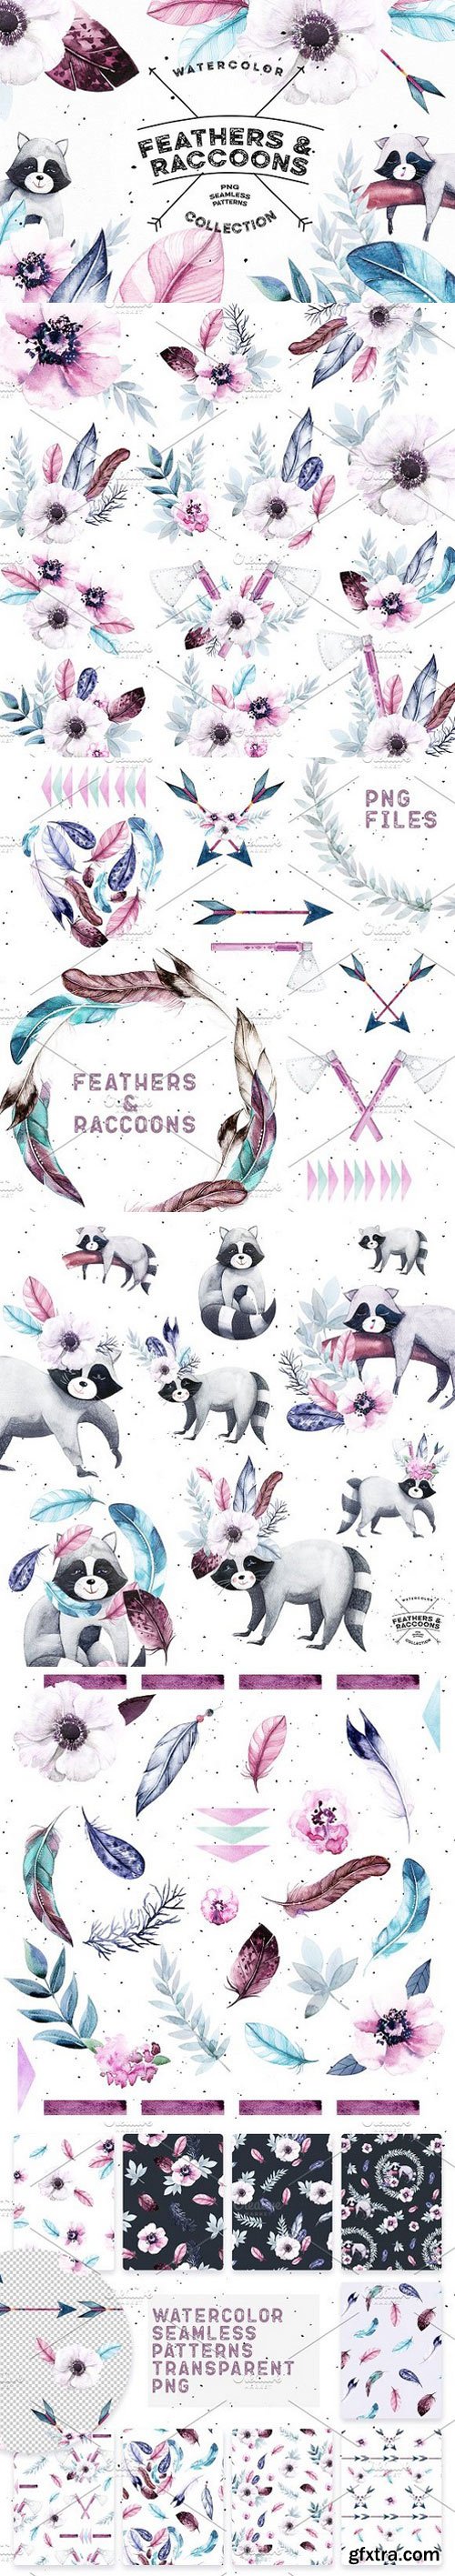 CM - Watercolor Feathers & Raccoons 1329017